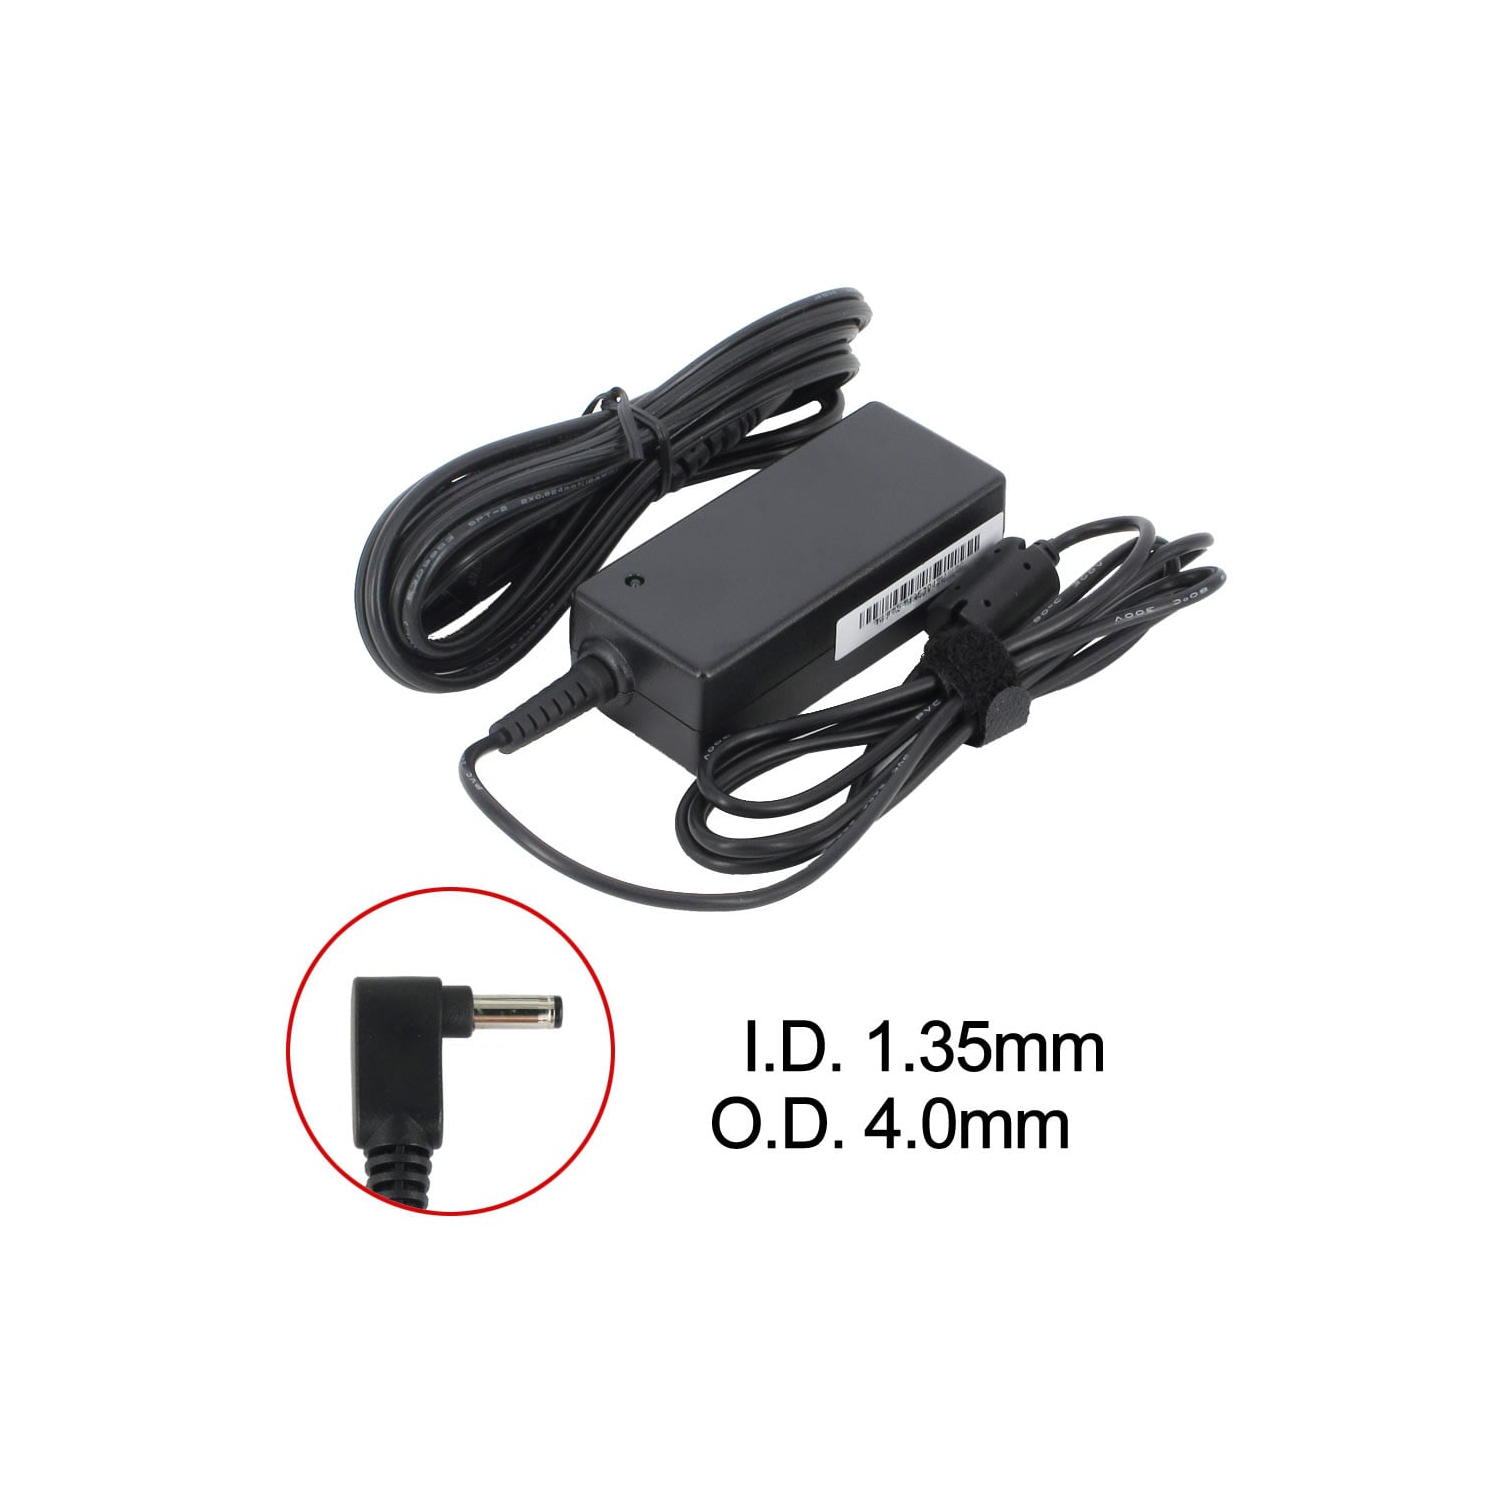 BATTDEPOT New Laptop AC Adapter for Asus X540YA-1C 0A001-00230400 0A001-00330100 EXA1206EH